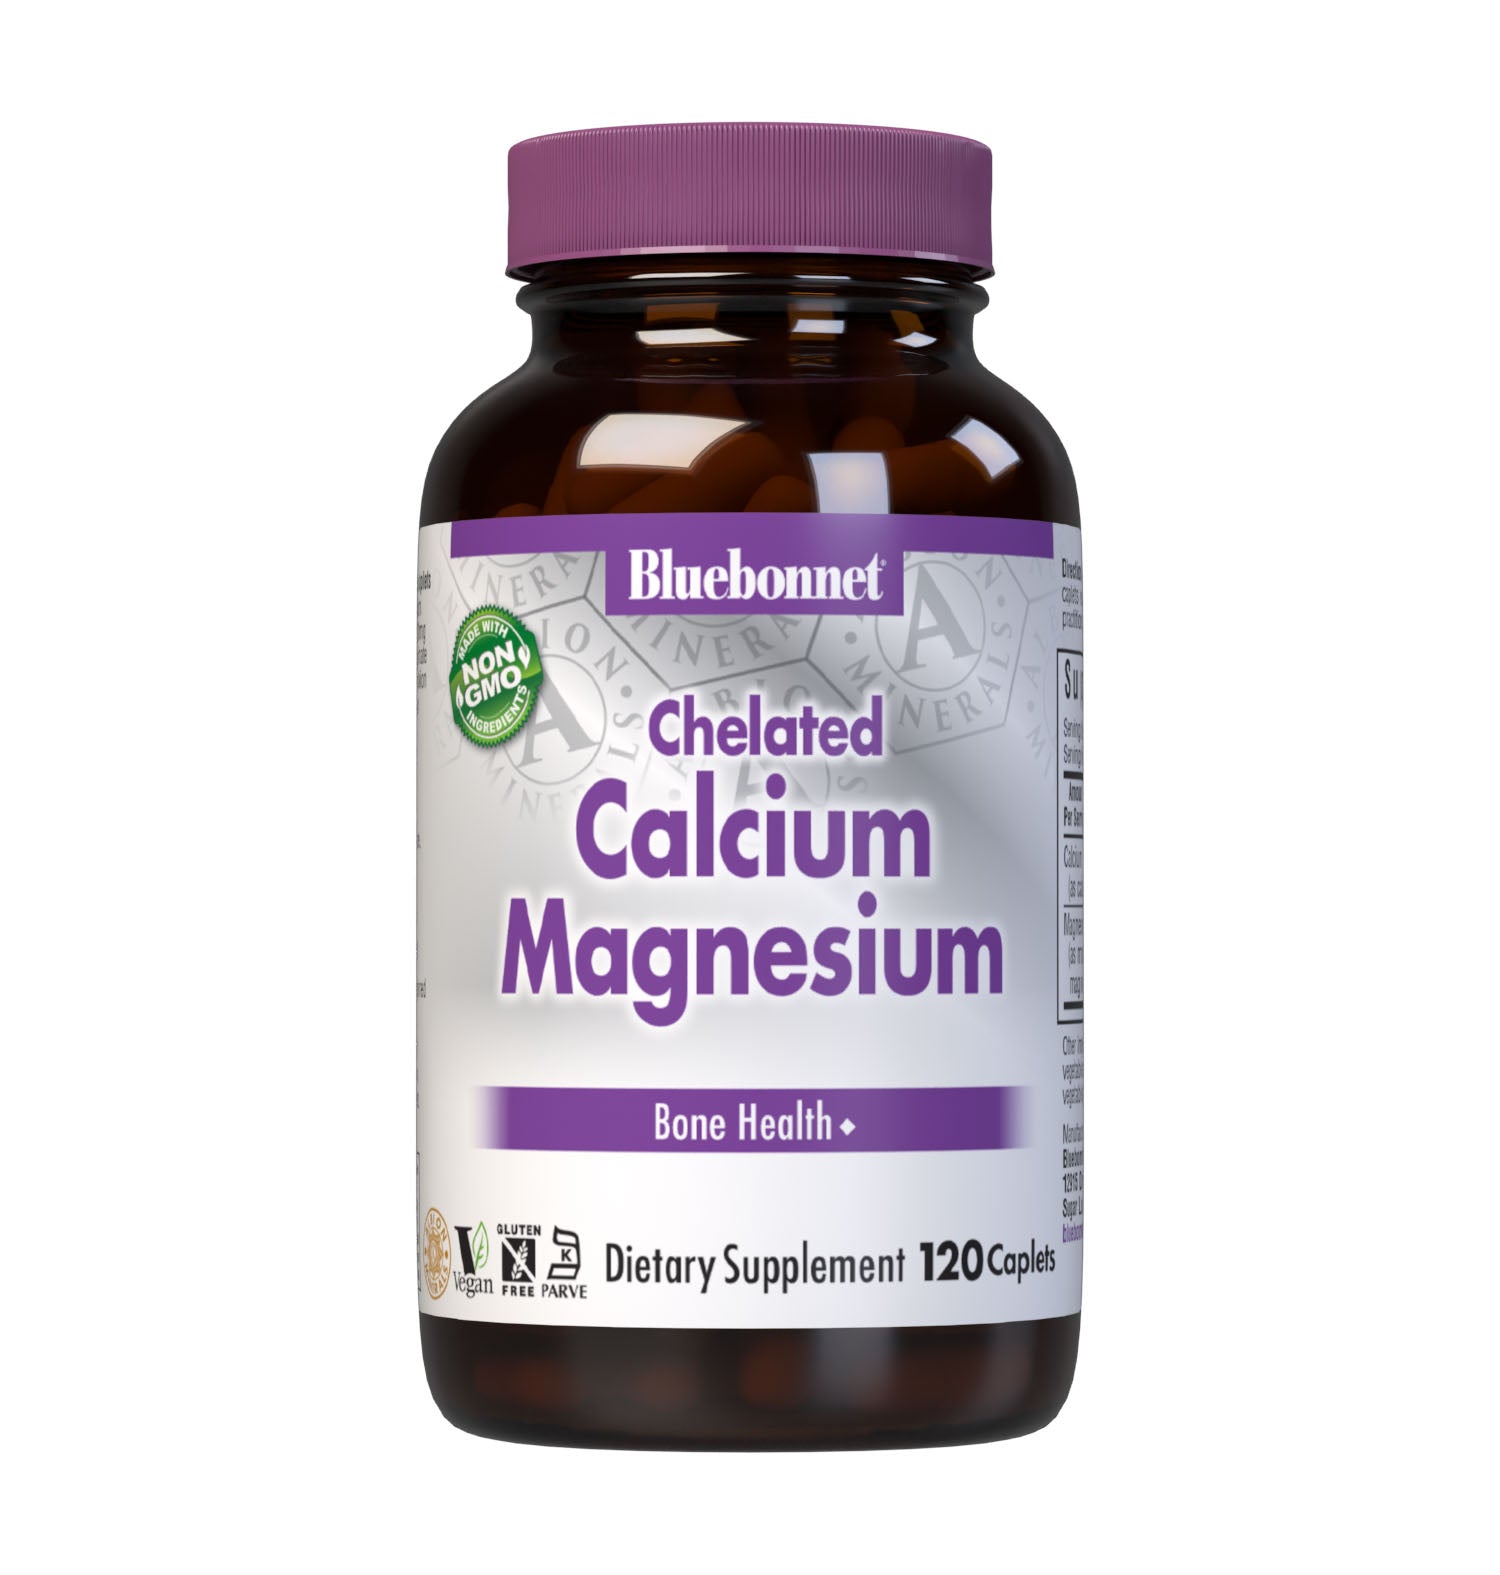 Bluebonnet's Chelated Calcium Magnesium 120 Caplets are formulated with 500 mg of elemental calcium from fully reacted calcium bisglycinate and 200 mg of elemental magnesium from magnesium glycinate chelate buffered with magnesium oxide from Albion for strong healthy bones. Buffered magnesium increases the pH (alkalinity) of the formula, making it more gentle on the digestive tract and easier to absorb. #size_120 count